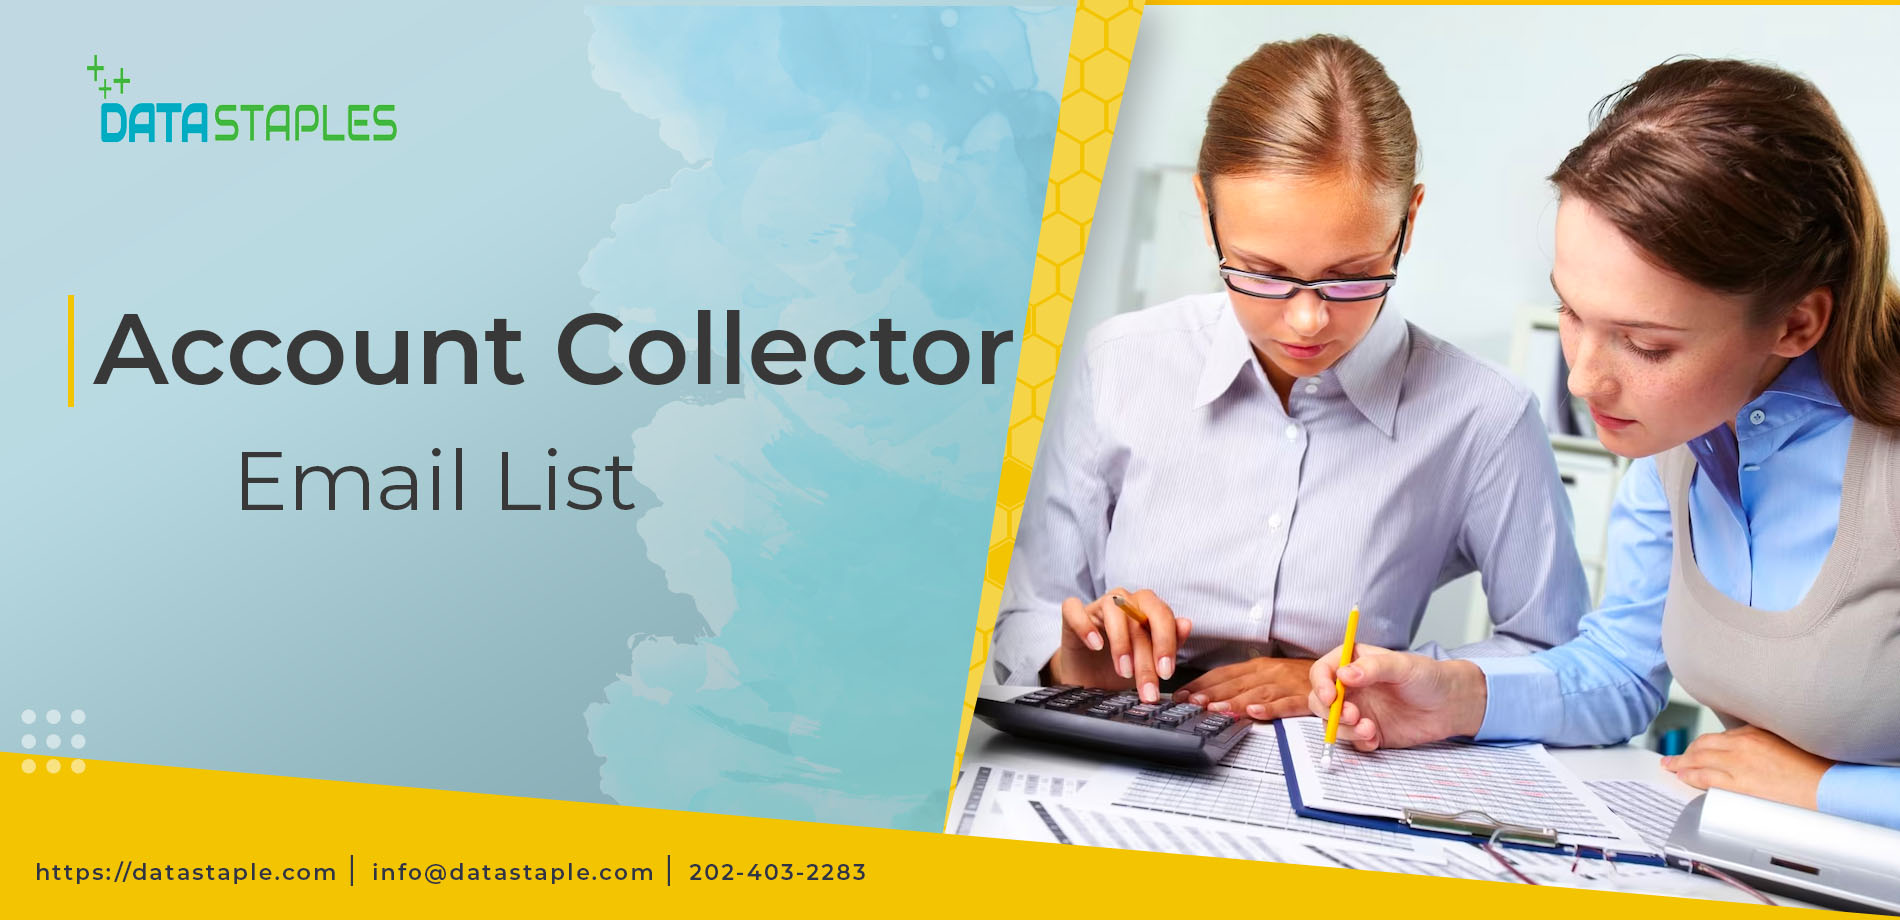 Account Collector Email List | DataStaples